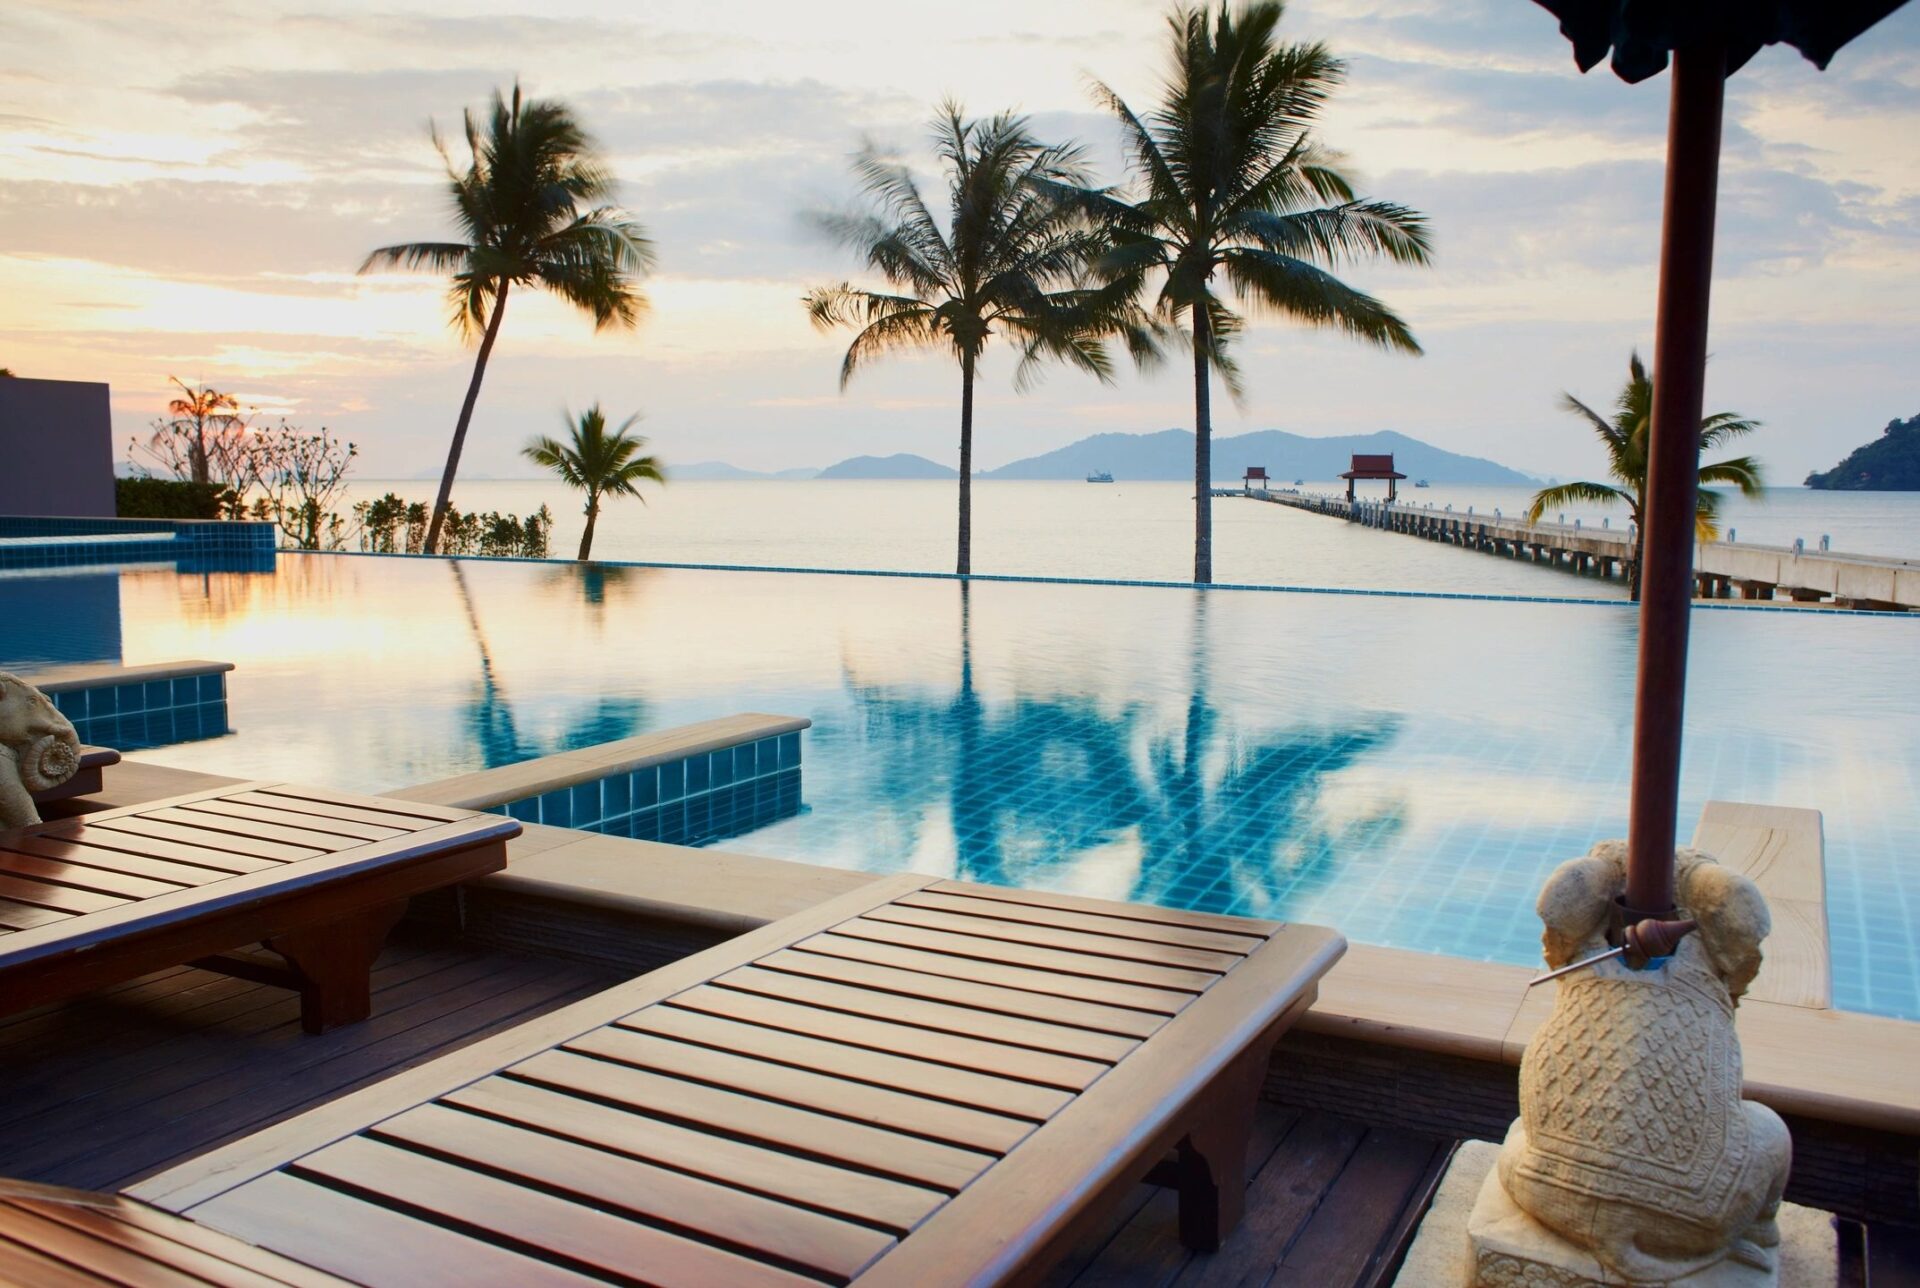 A pool with wooden benches and palm trees in the background.